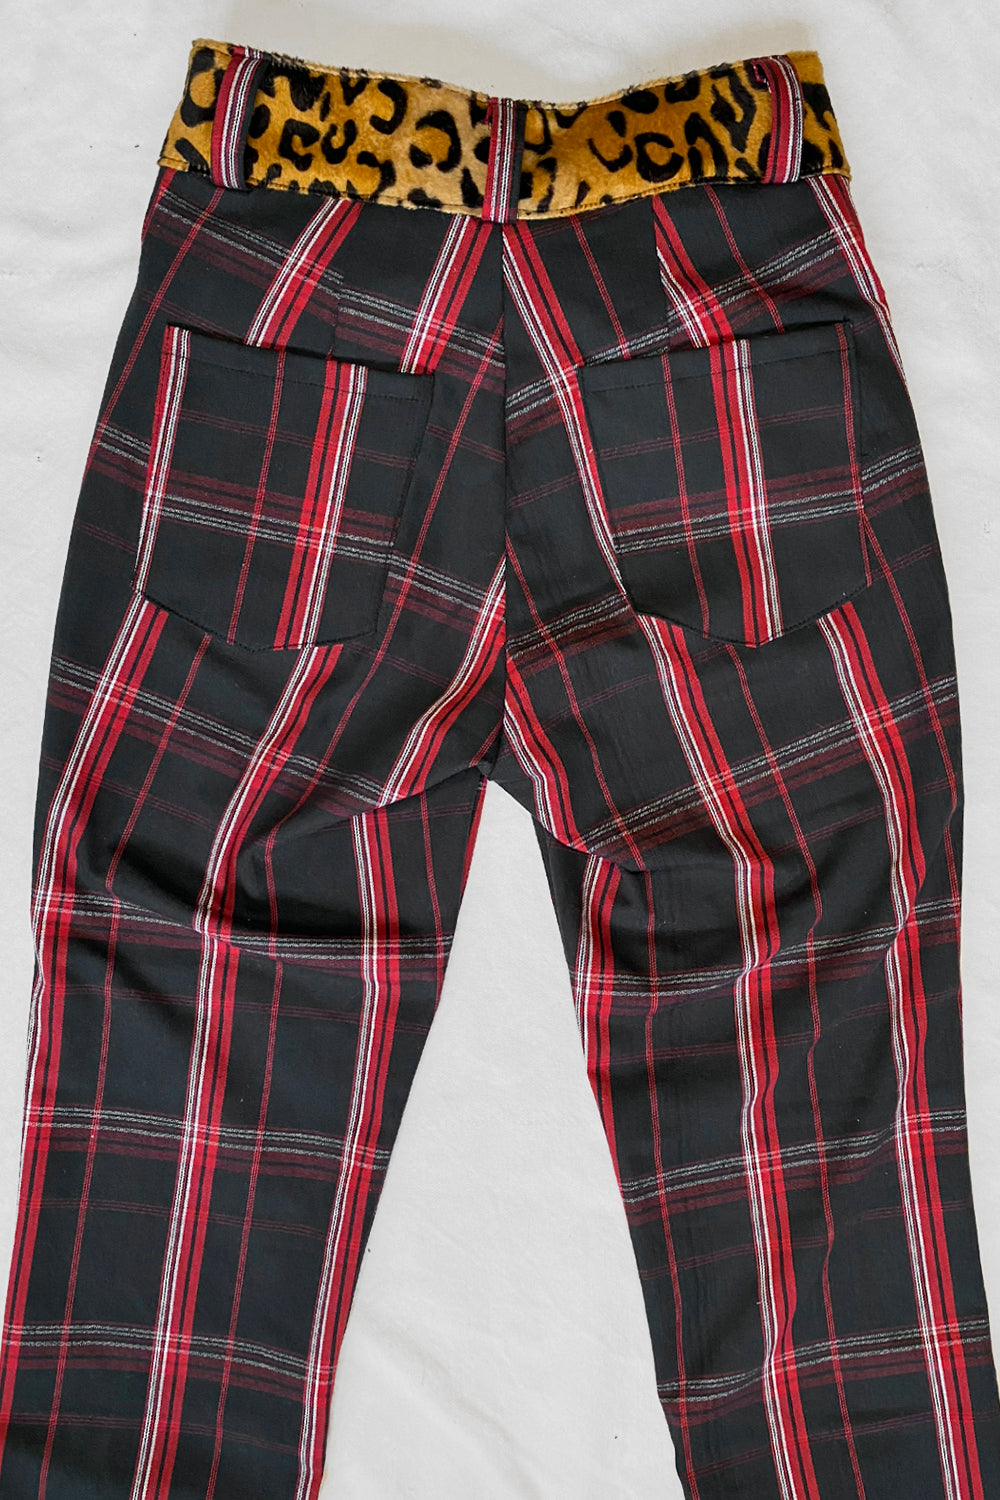 FLASH SALE! Trainspotting Pants: Leopard/Plaid | Made To Order